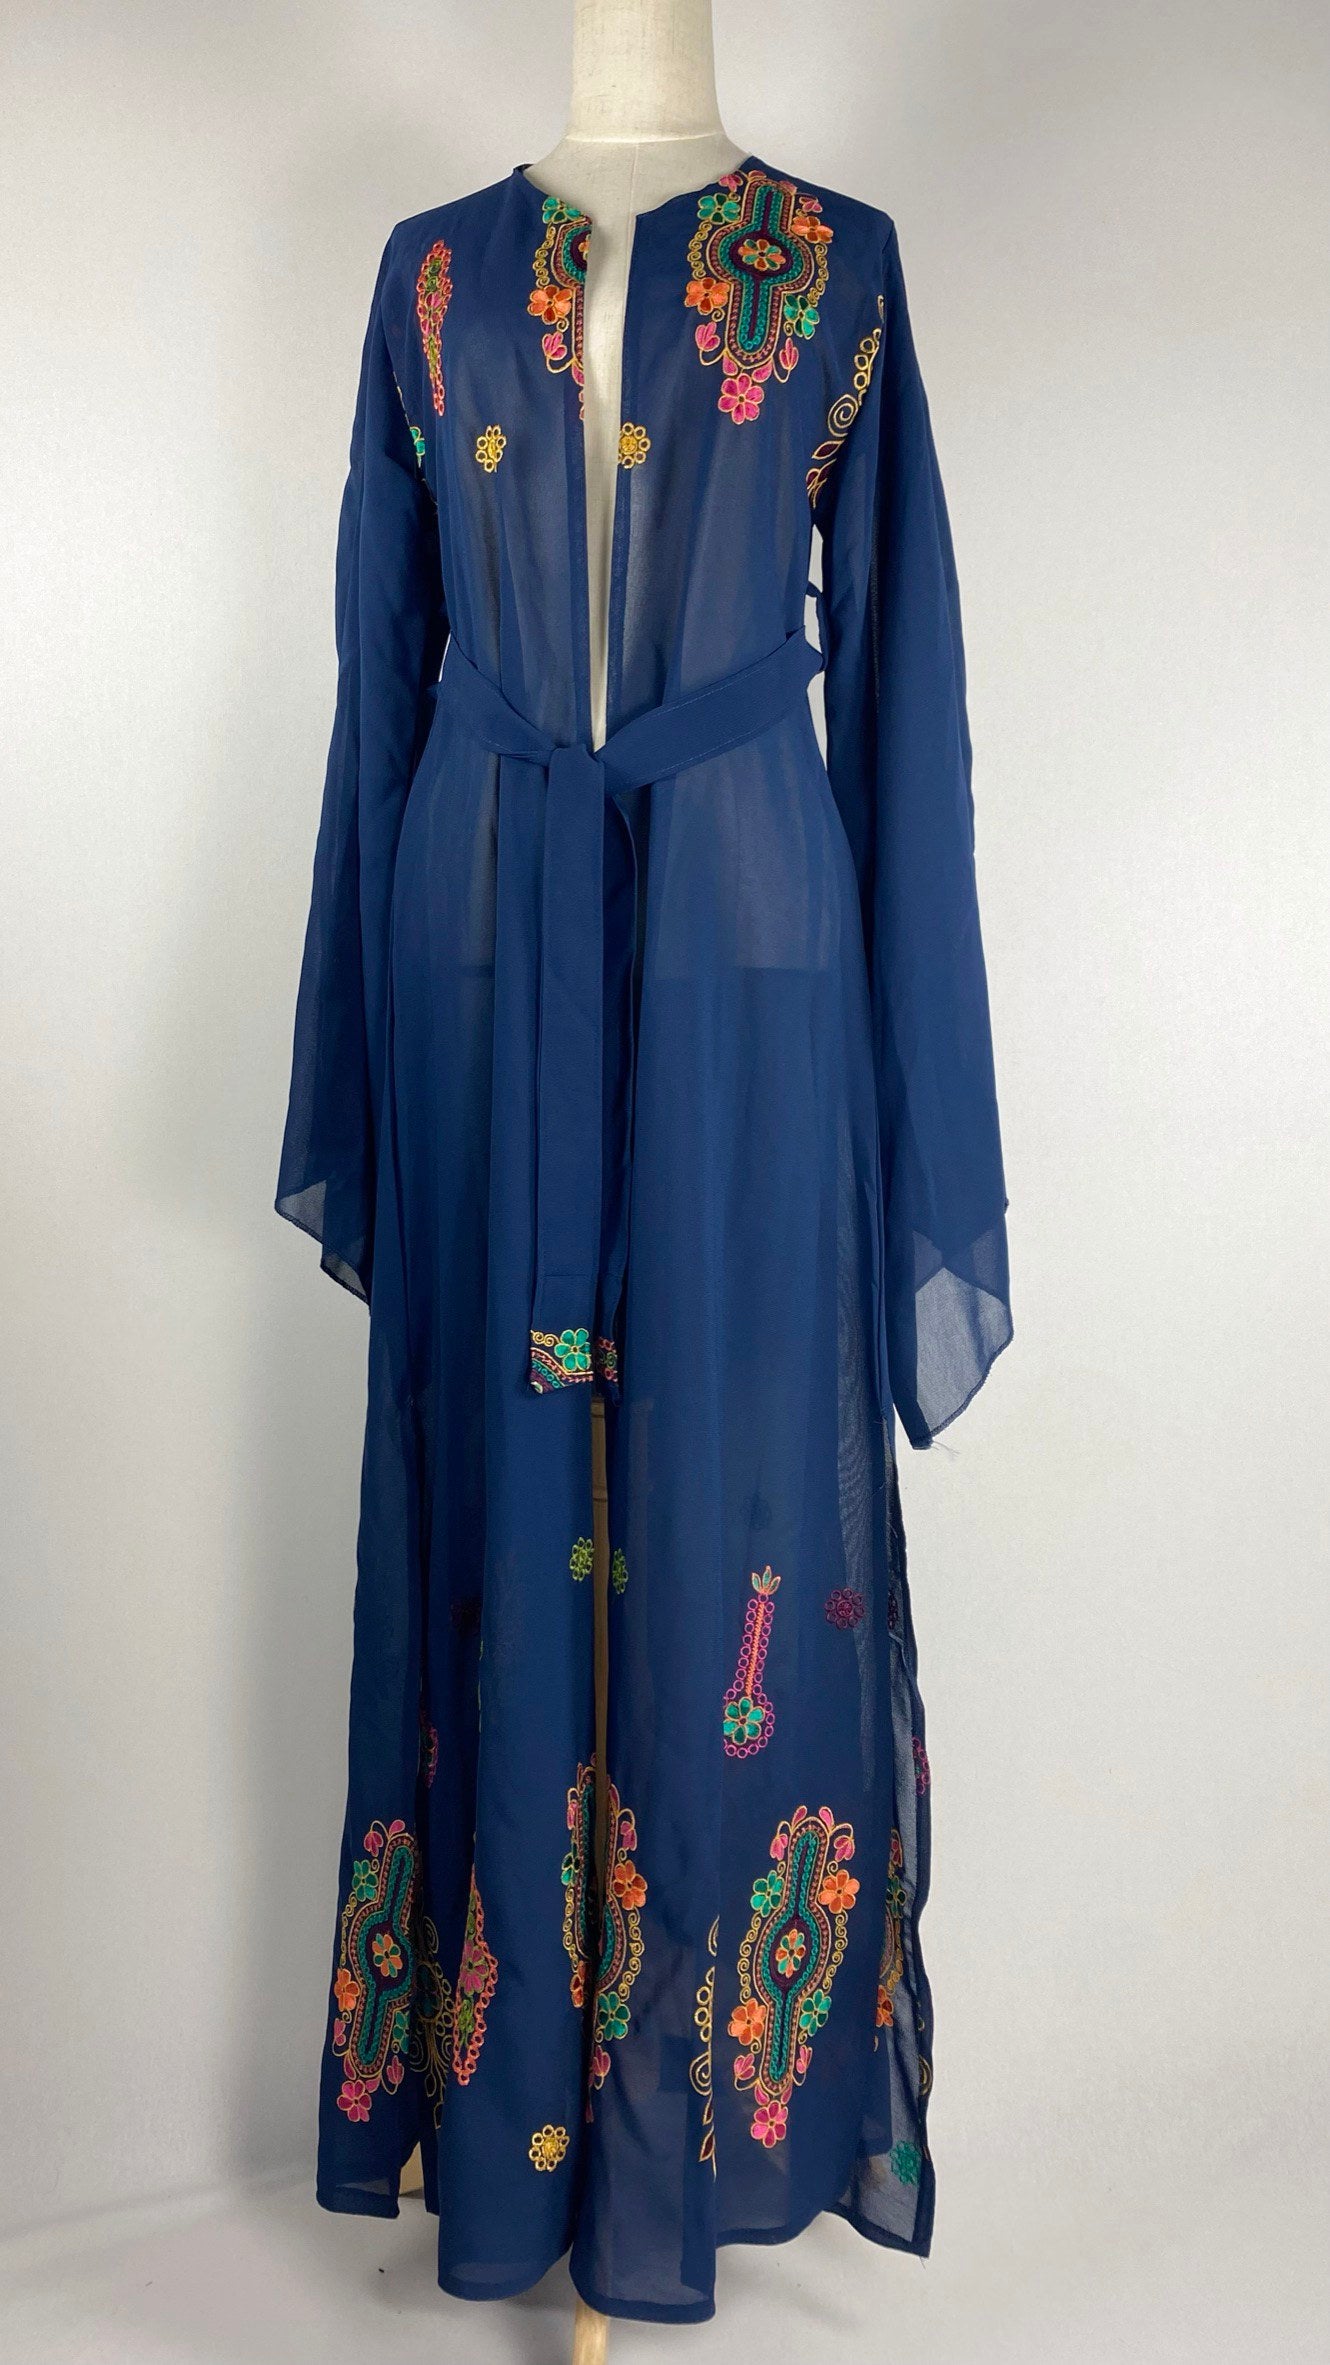 Long Sleeve Open Maxi Cardigan with Embroidery, Navy